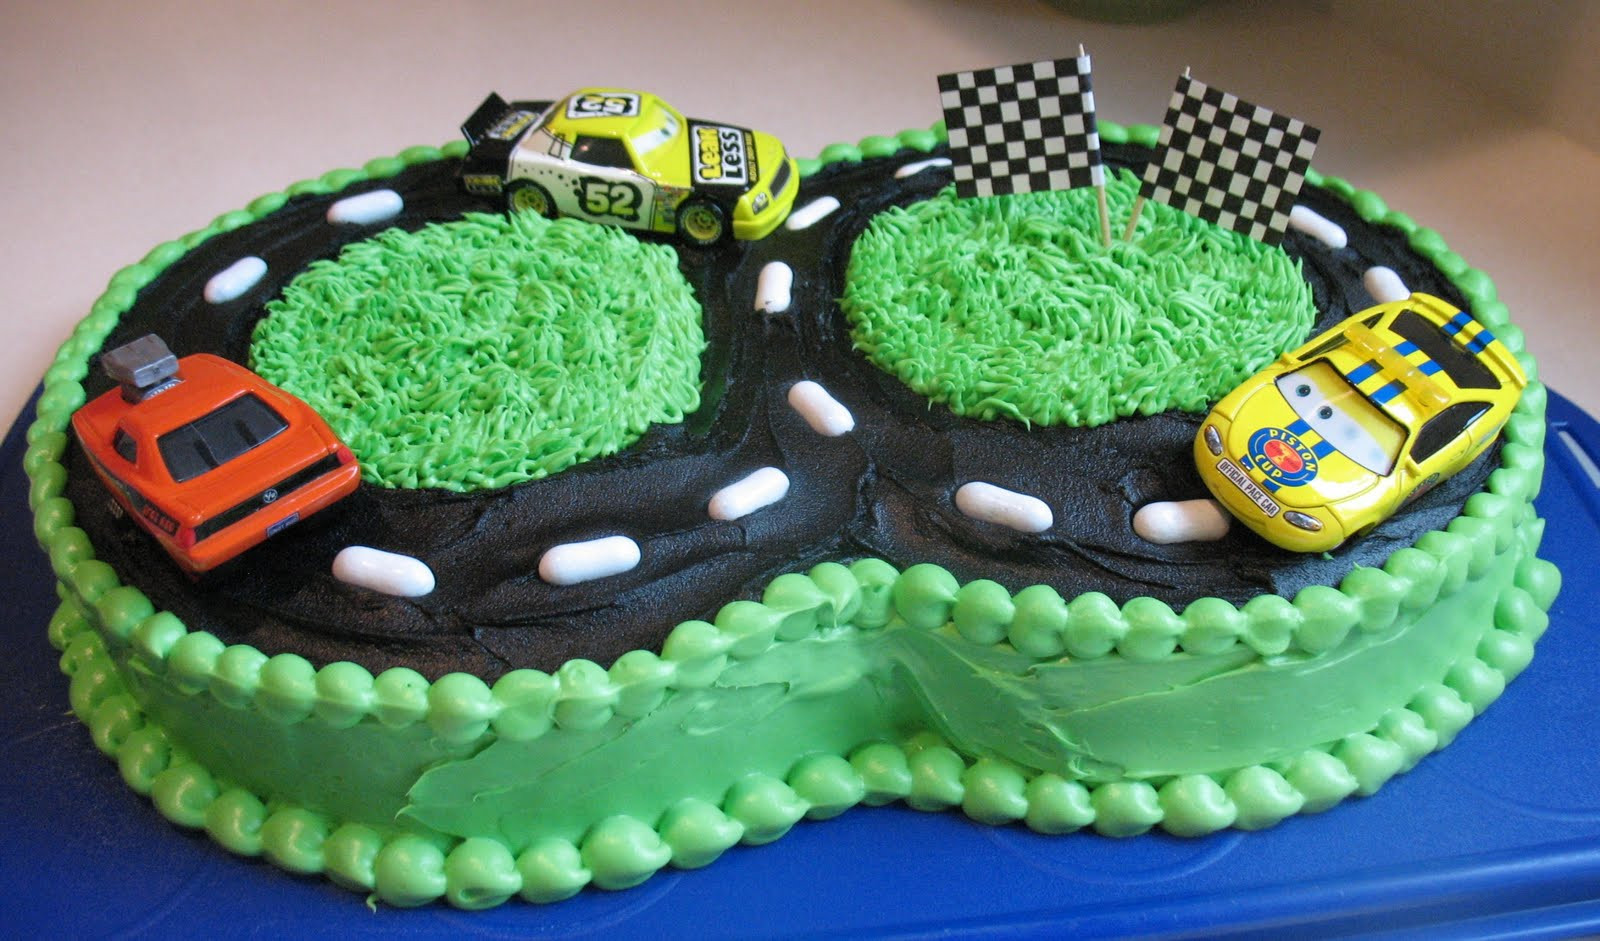 Walmart Cakes Designs For Birthday
 Home Tips Kids Will Have A Fun With Walmart Cake Designs